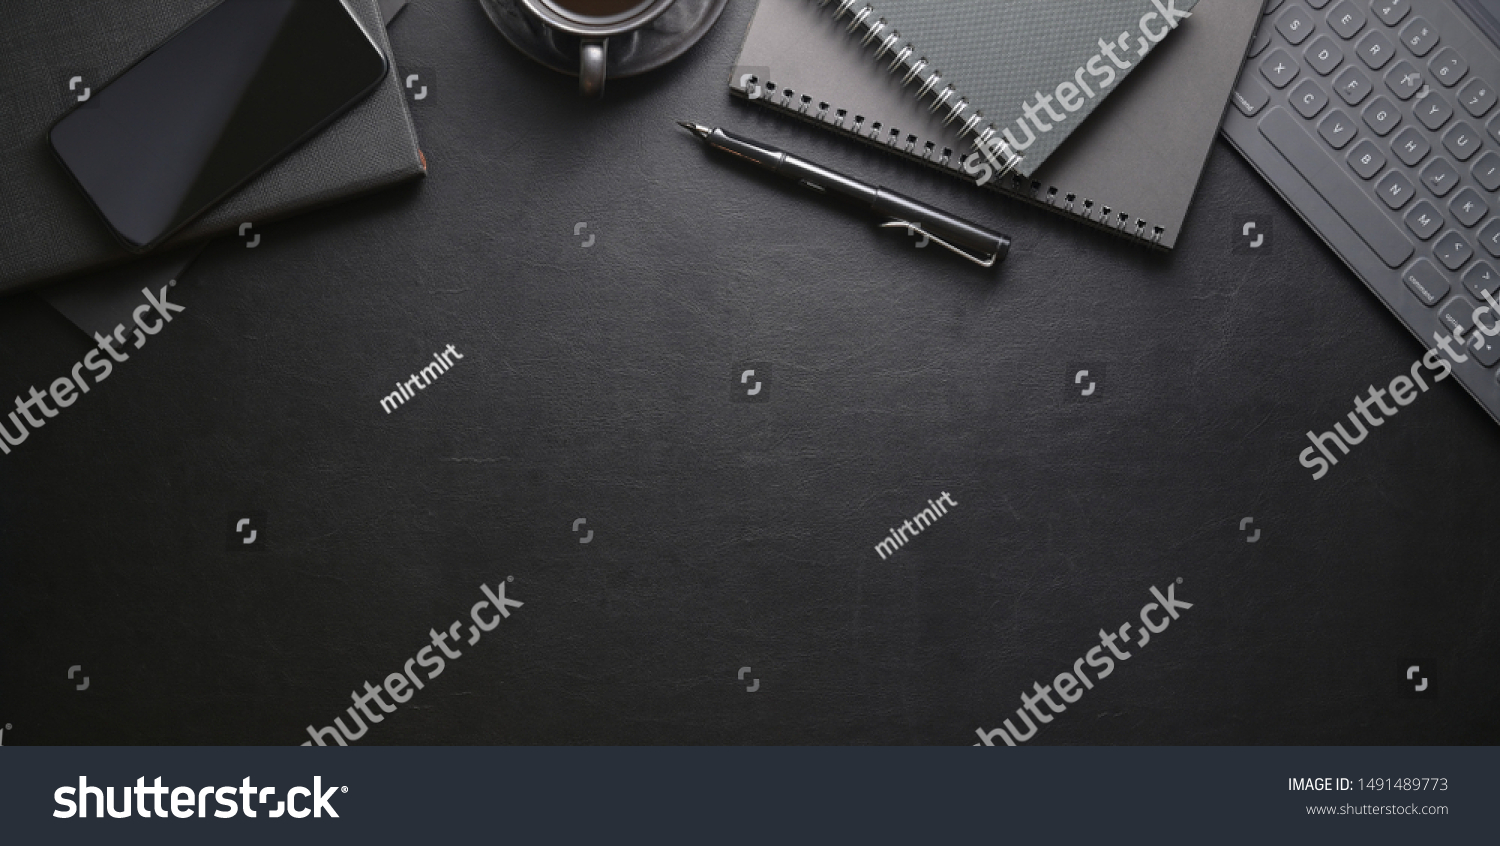 Top view of dark stylish workplace with smartphone and office supplies on black leather table background  #1491489773